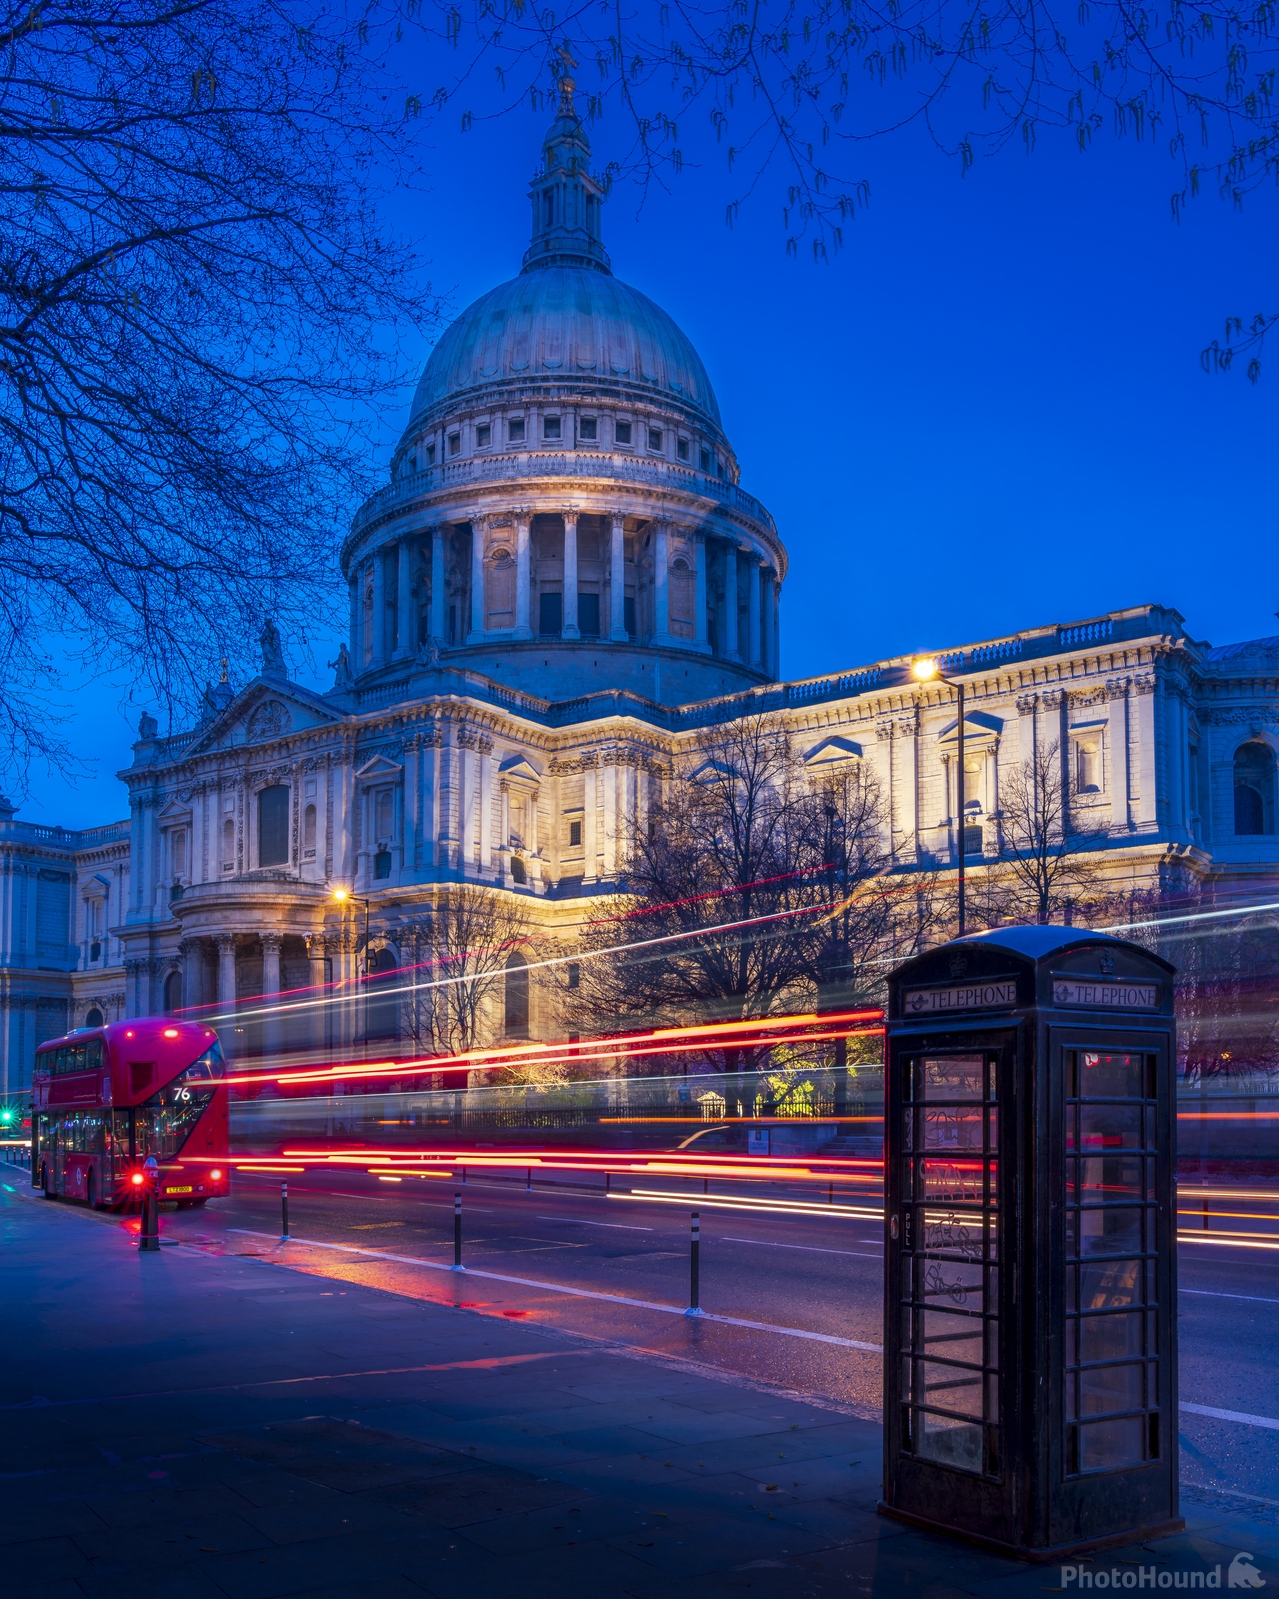 Image of Carter Lane Gardens - St Pauls Cathedral Viewpoint by Doug Stratton